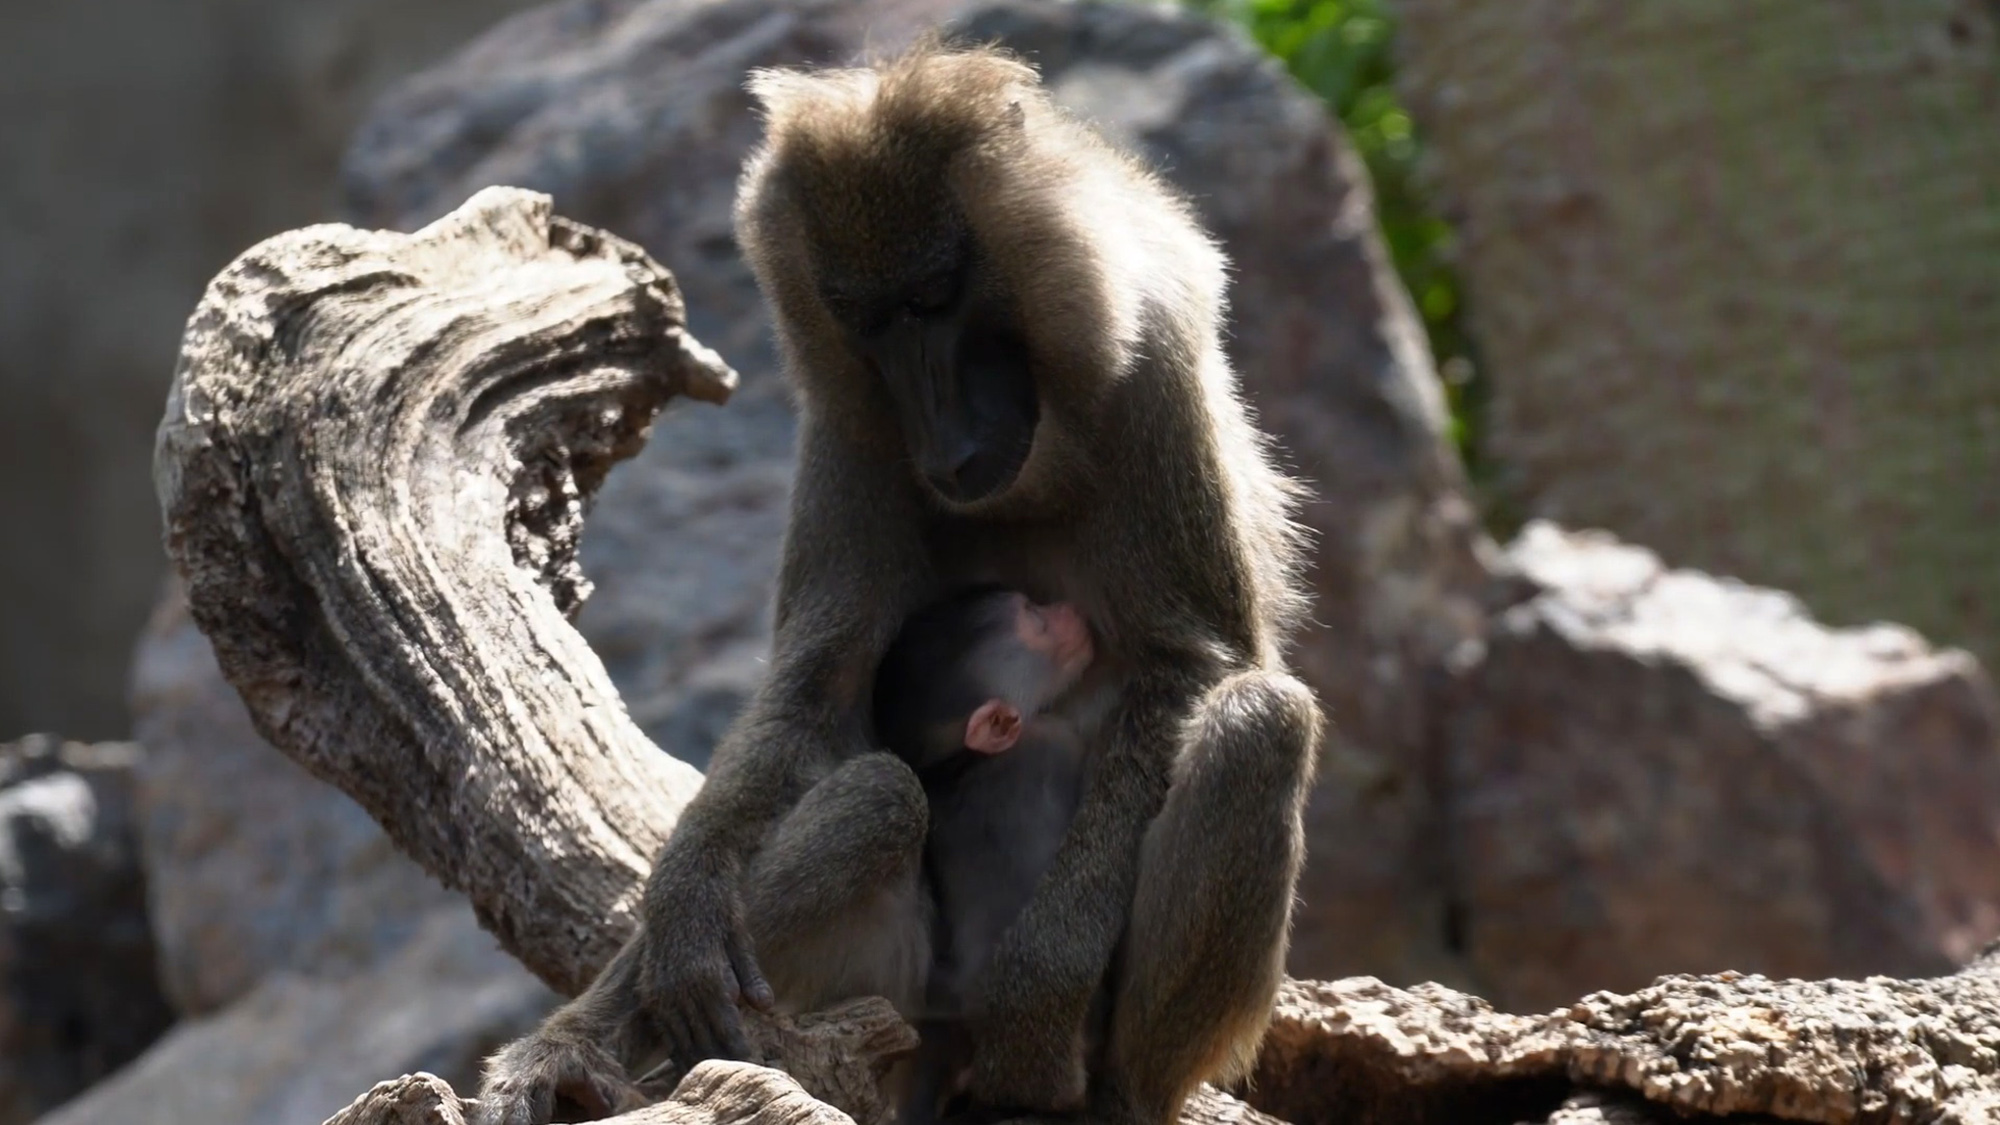 The primate Abuja, a Drill monkey, with her newborn in Bioparc Valencia, Spain. The species is endangered, with only about 4,000 individuals thought to remain in the wild. (Bioparc Valencia/Zenger)